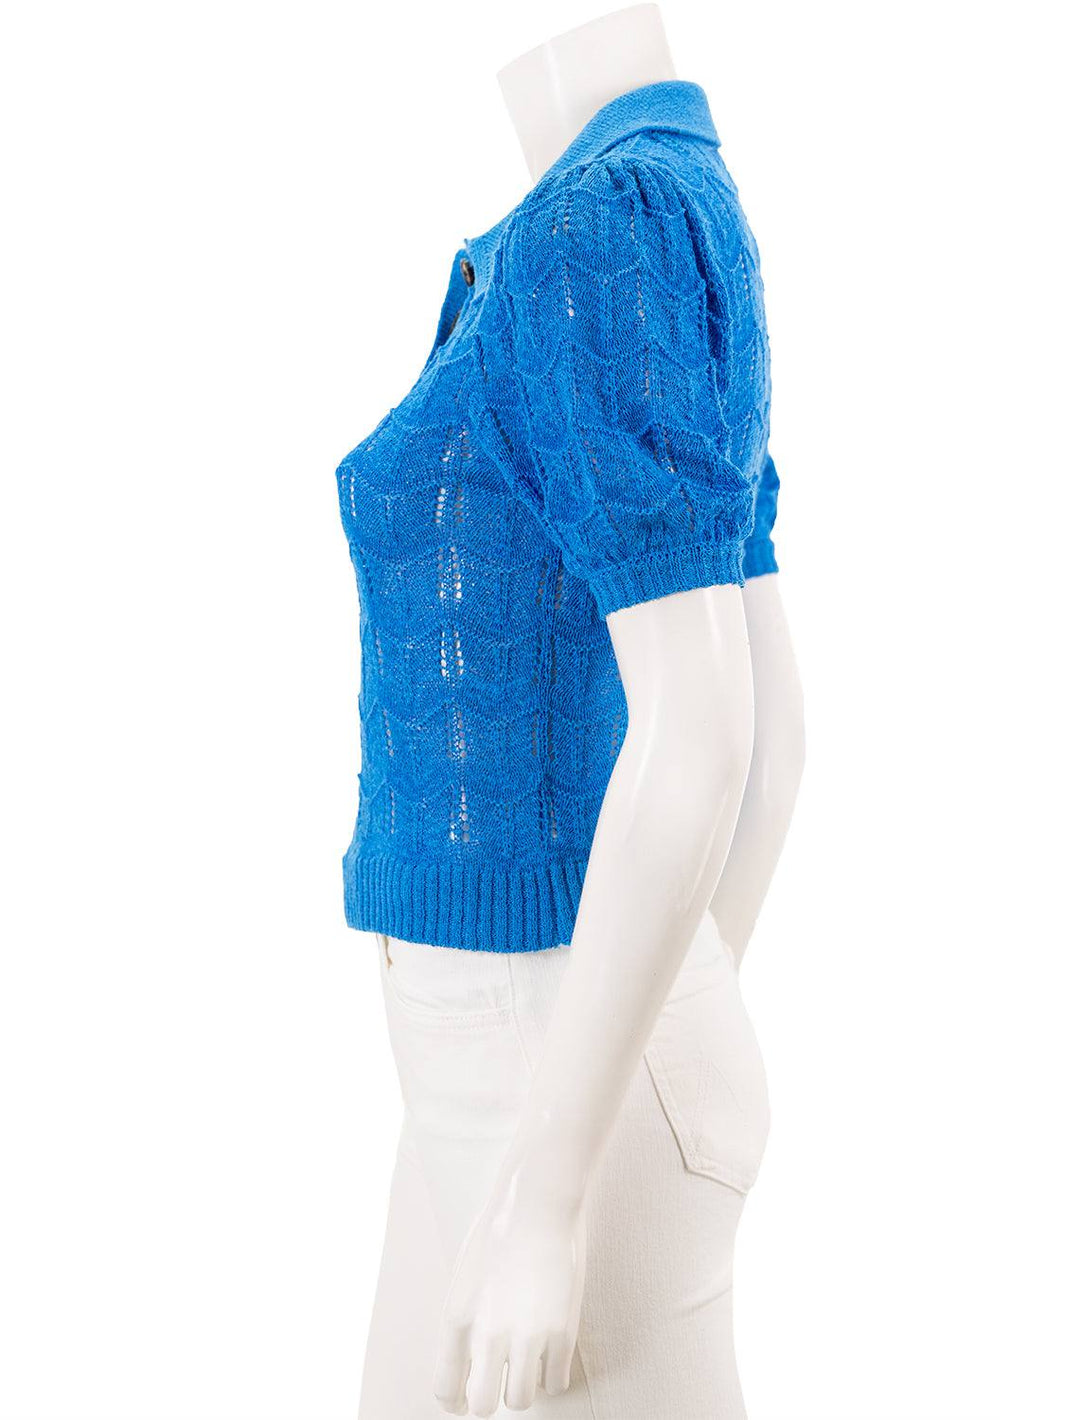 Side view of Vox Lux's Crocheted Polo Sweater in Turquoise.